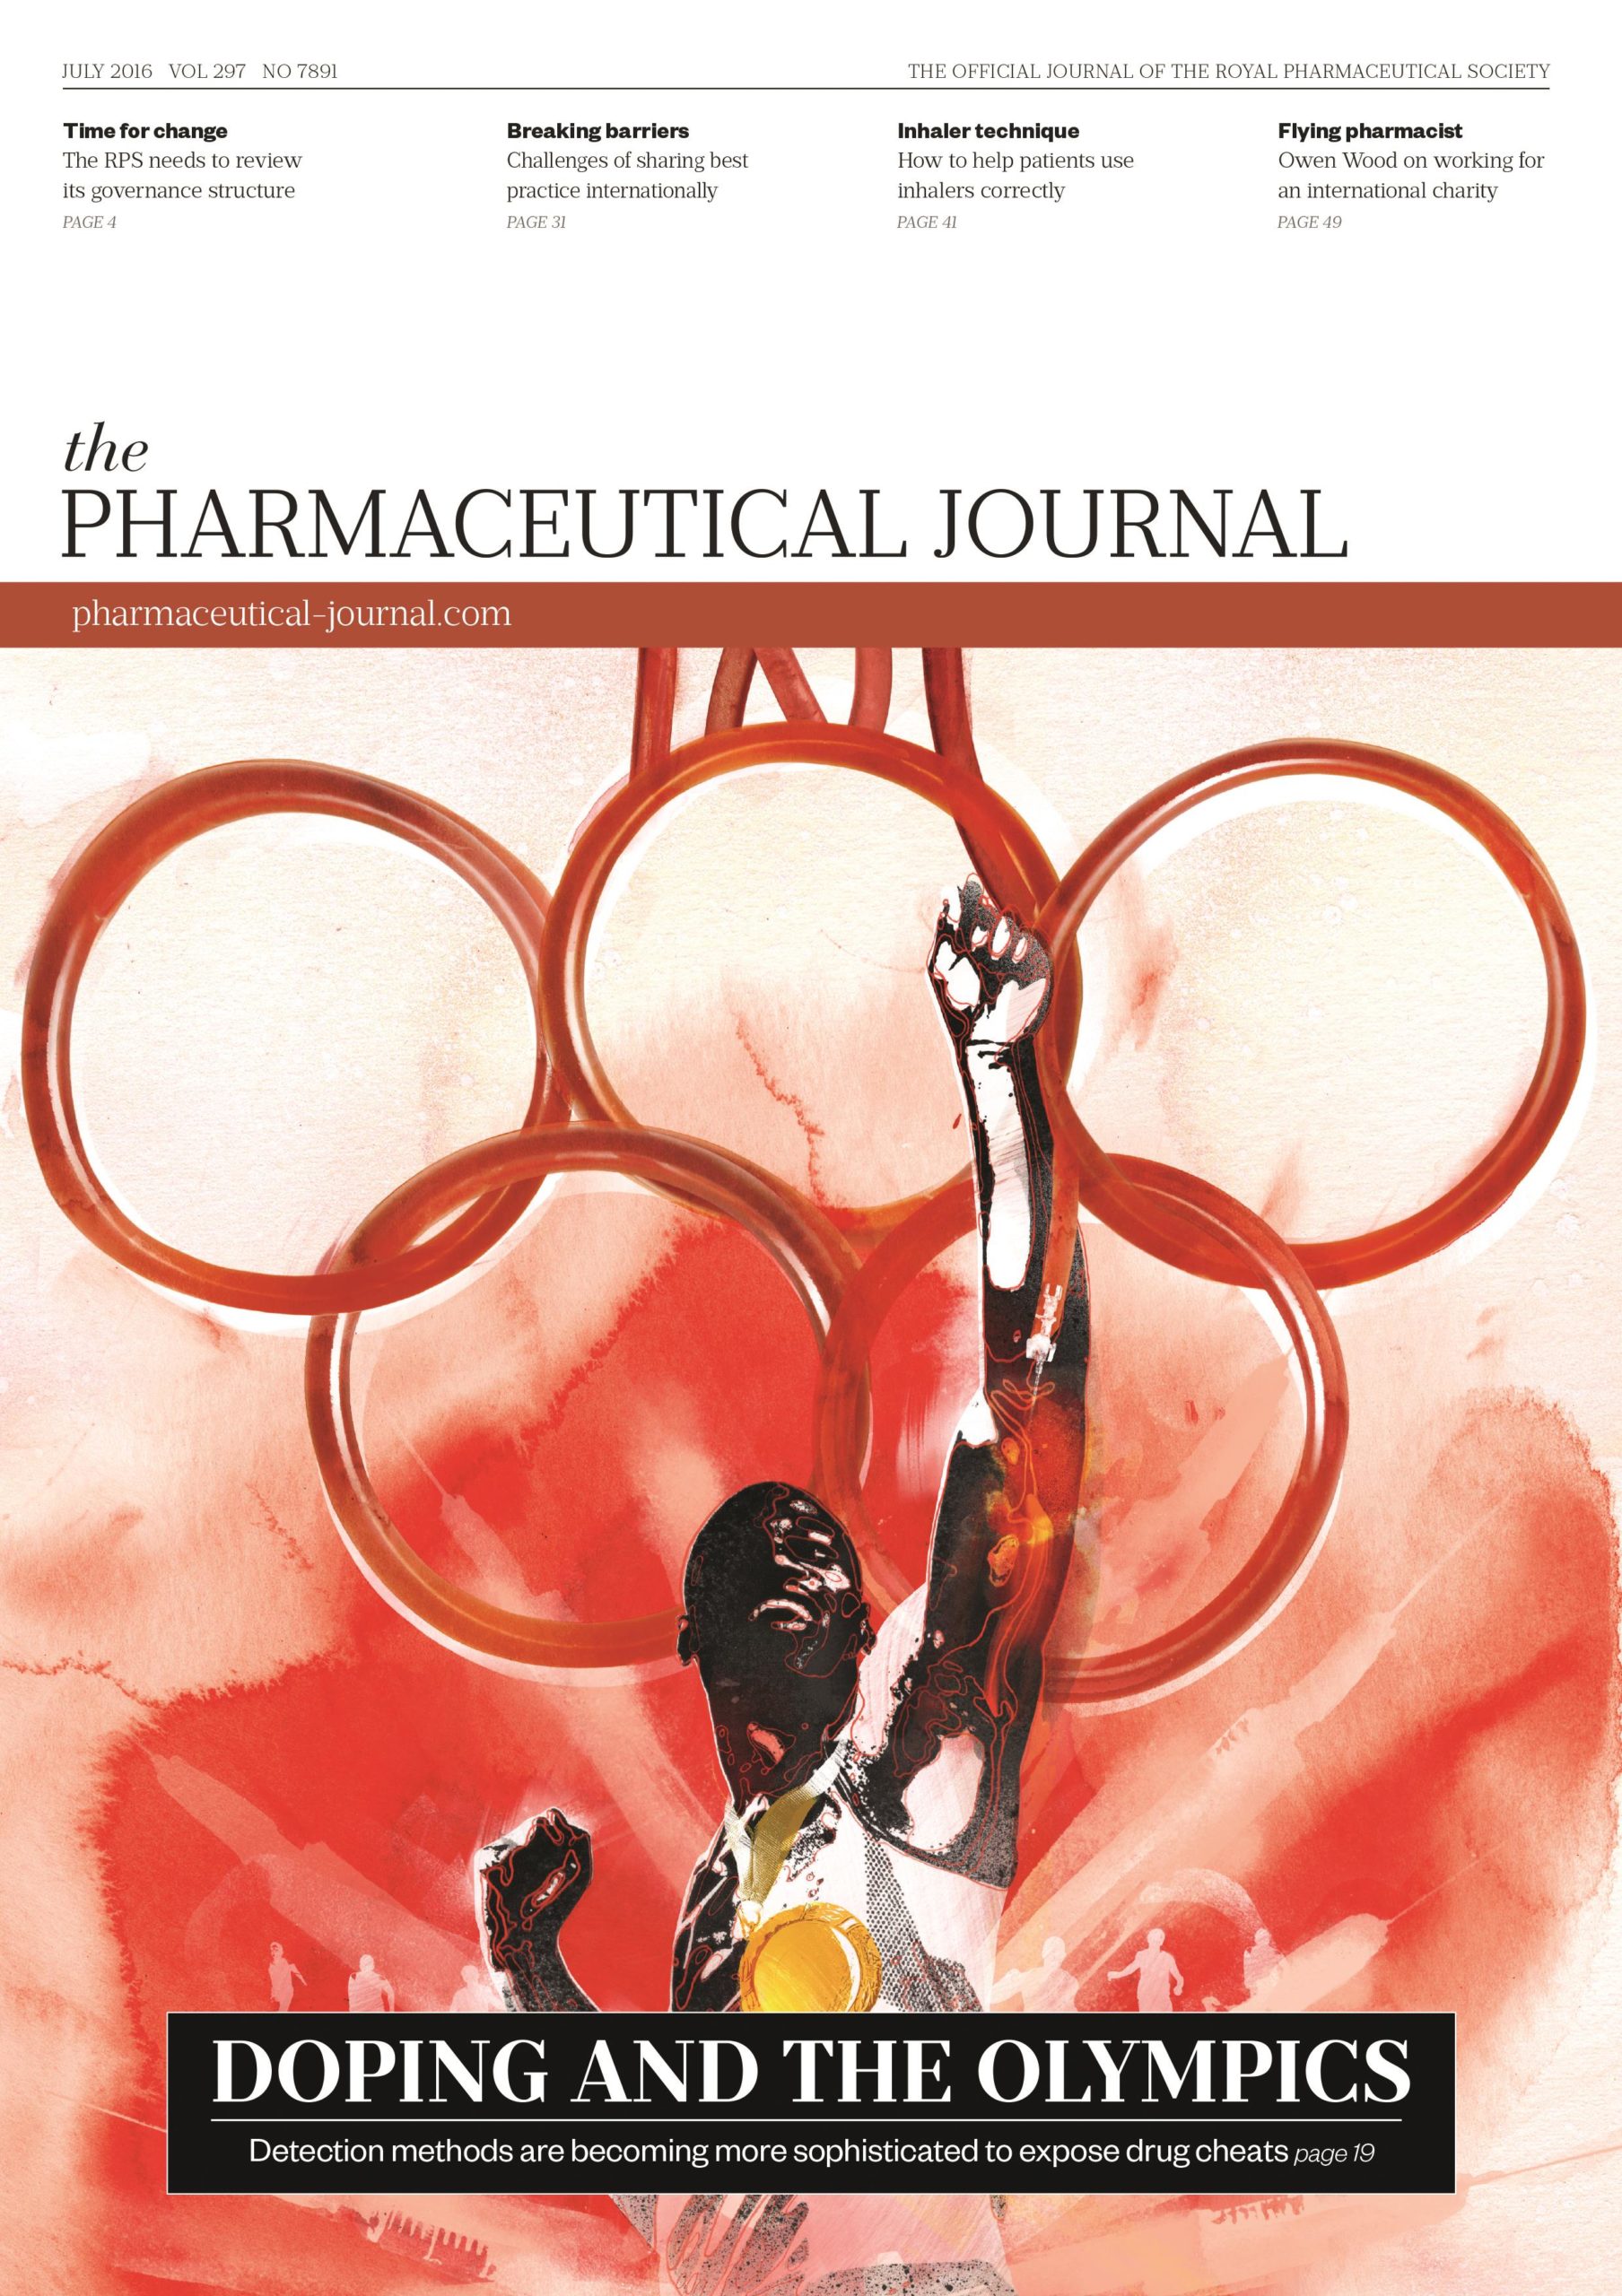 Publication issue cover for PJ, July 2016, Vol 297, No 7891